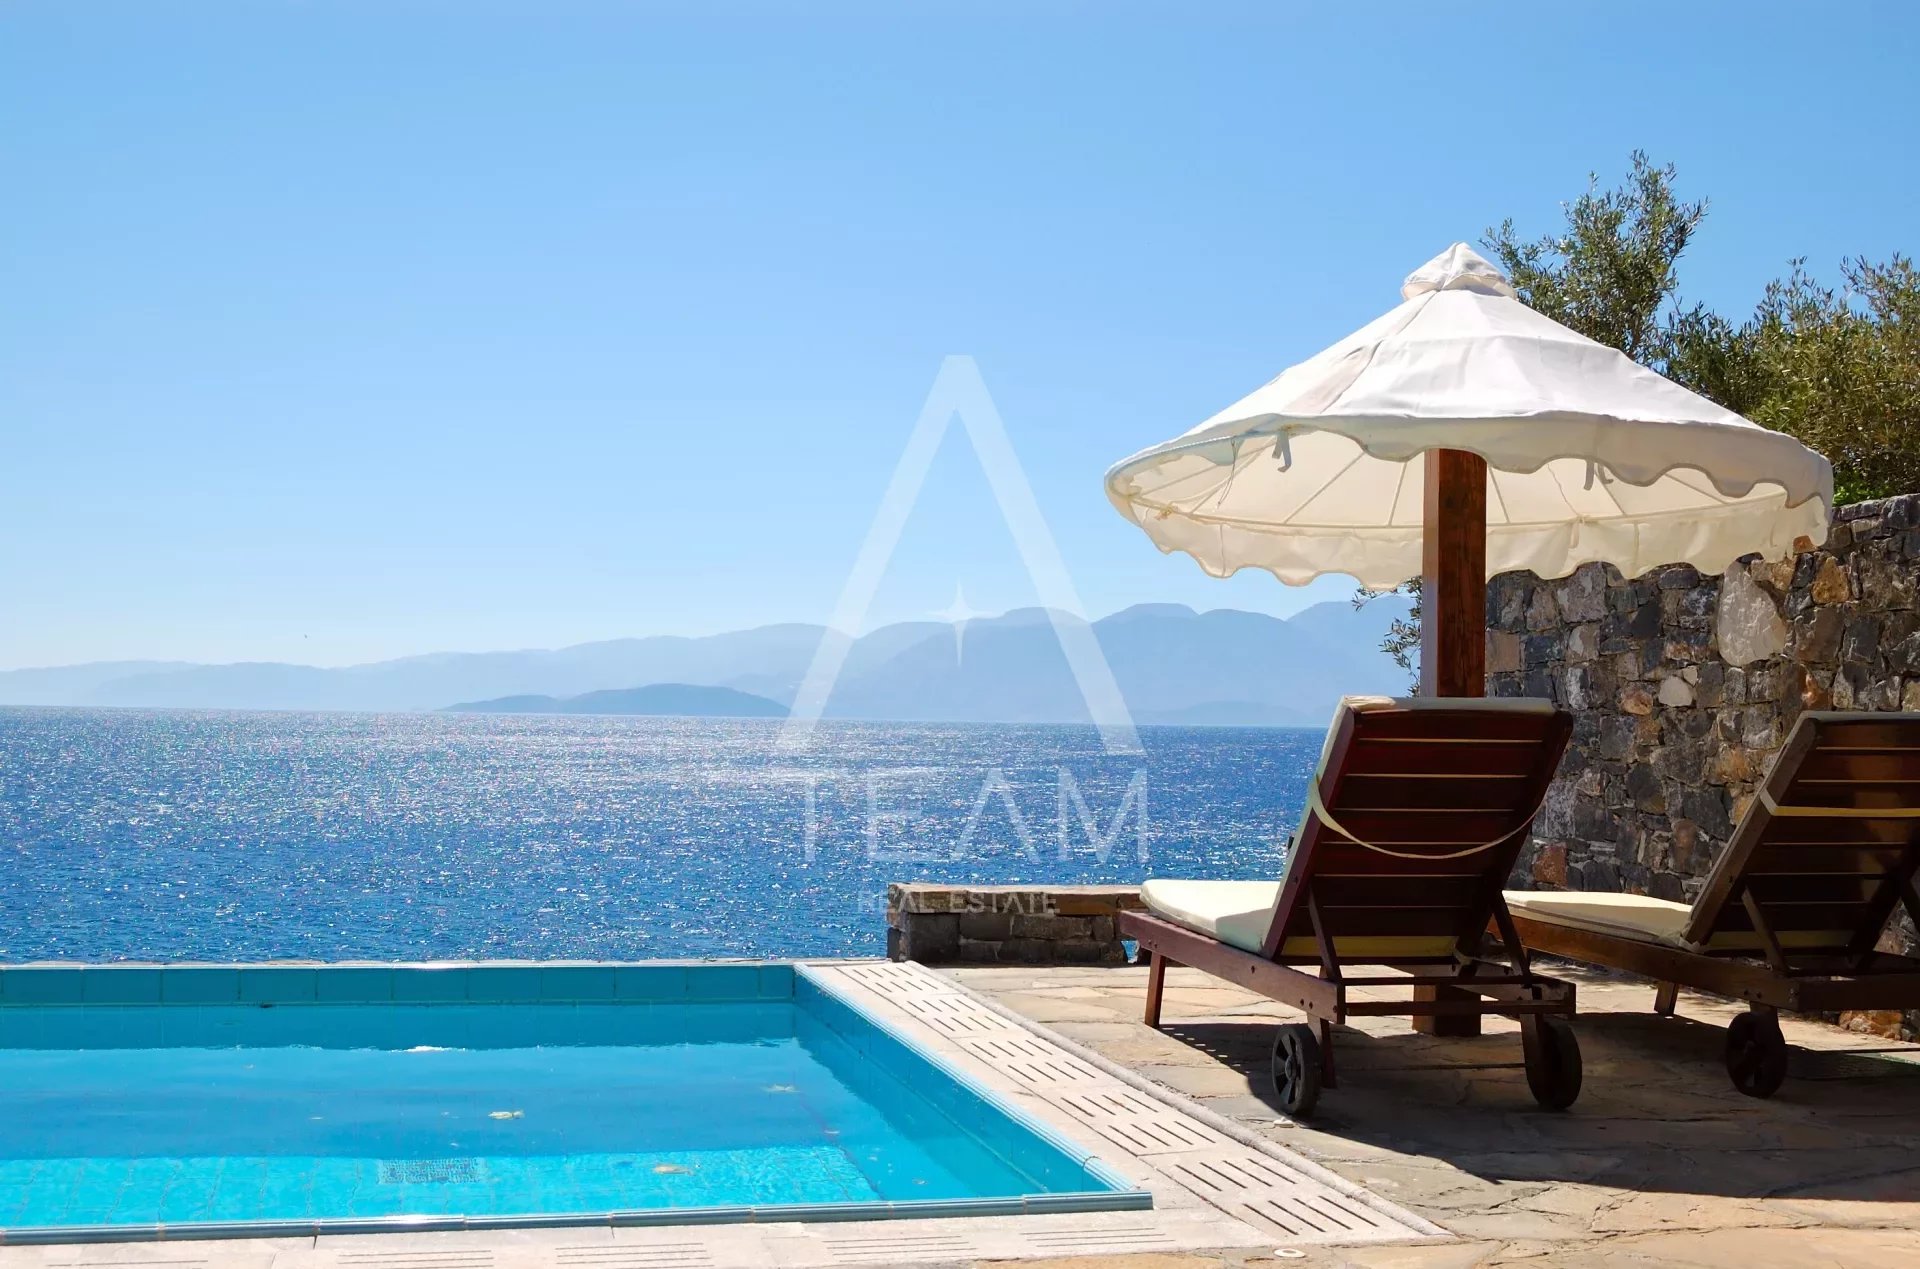 tourism,turquoise,holiday,sea,summer,beautiful,swimming,mountain,view,greece,sunbed,design,vacation,resort,decoration,sky,luxurious,nature,umbrella,island,recreation,relaxation,pool,deckchair,aegean,w